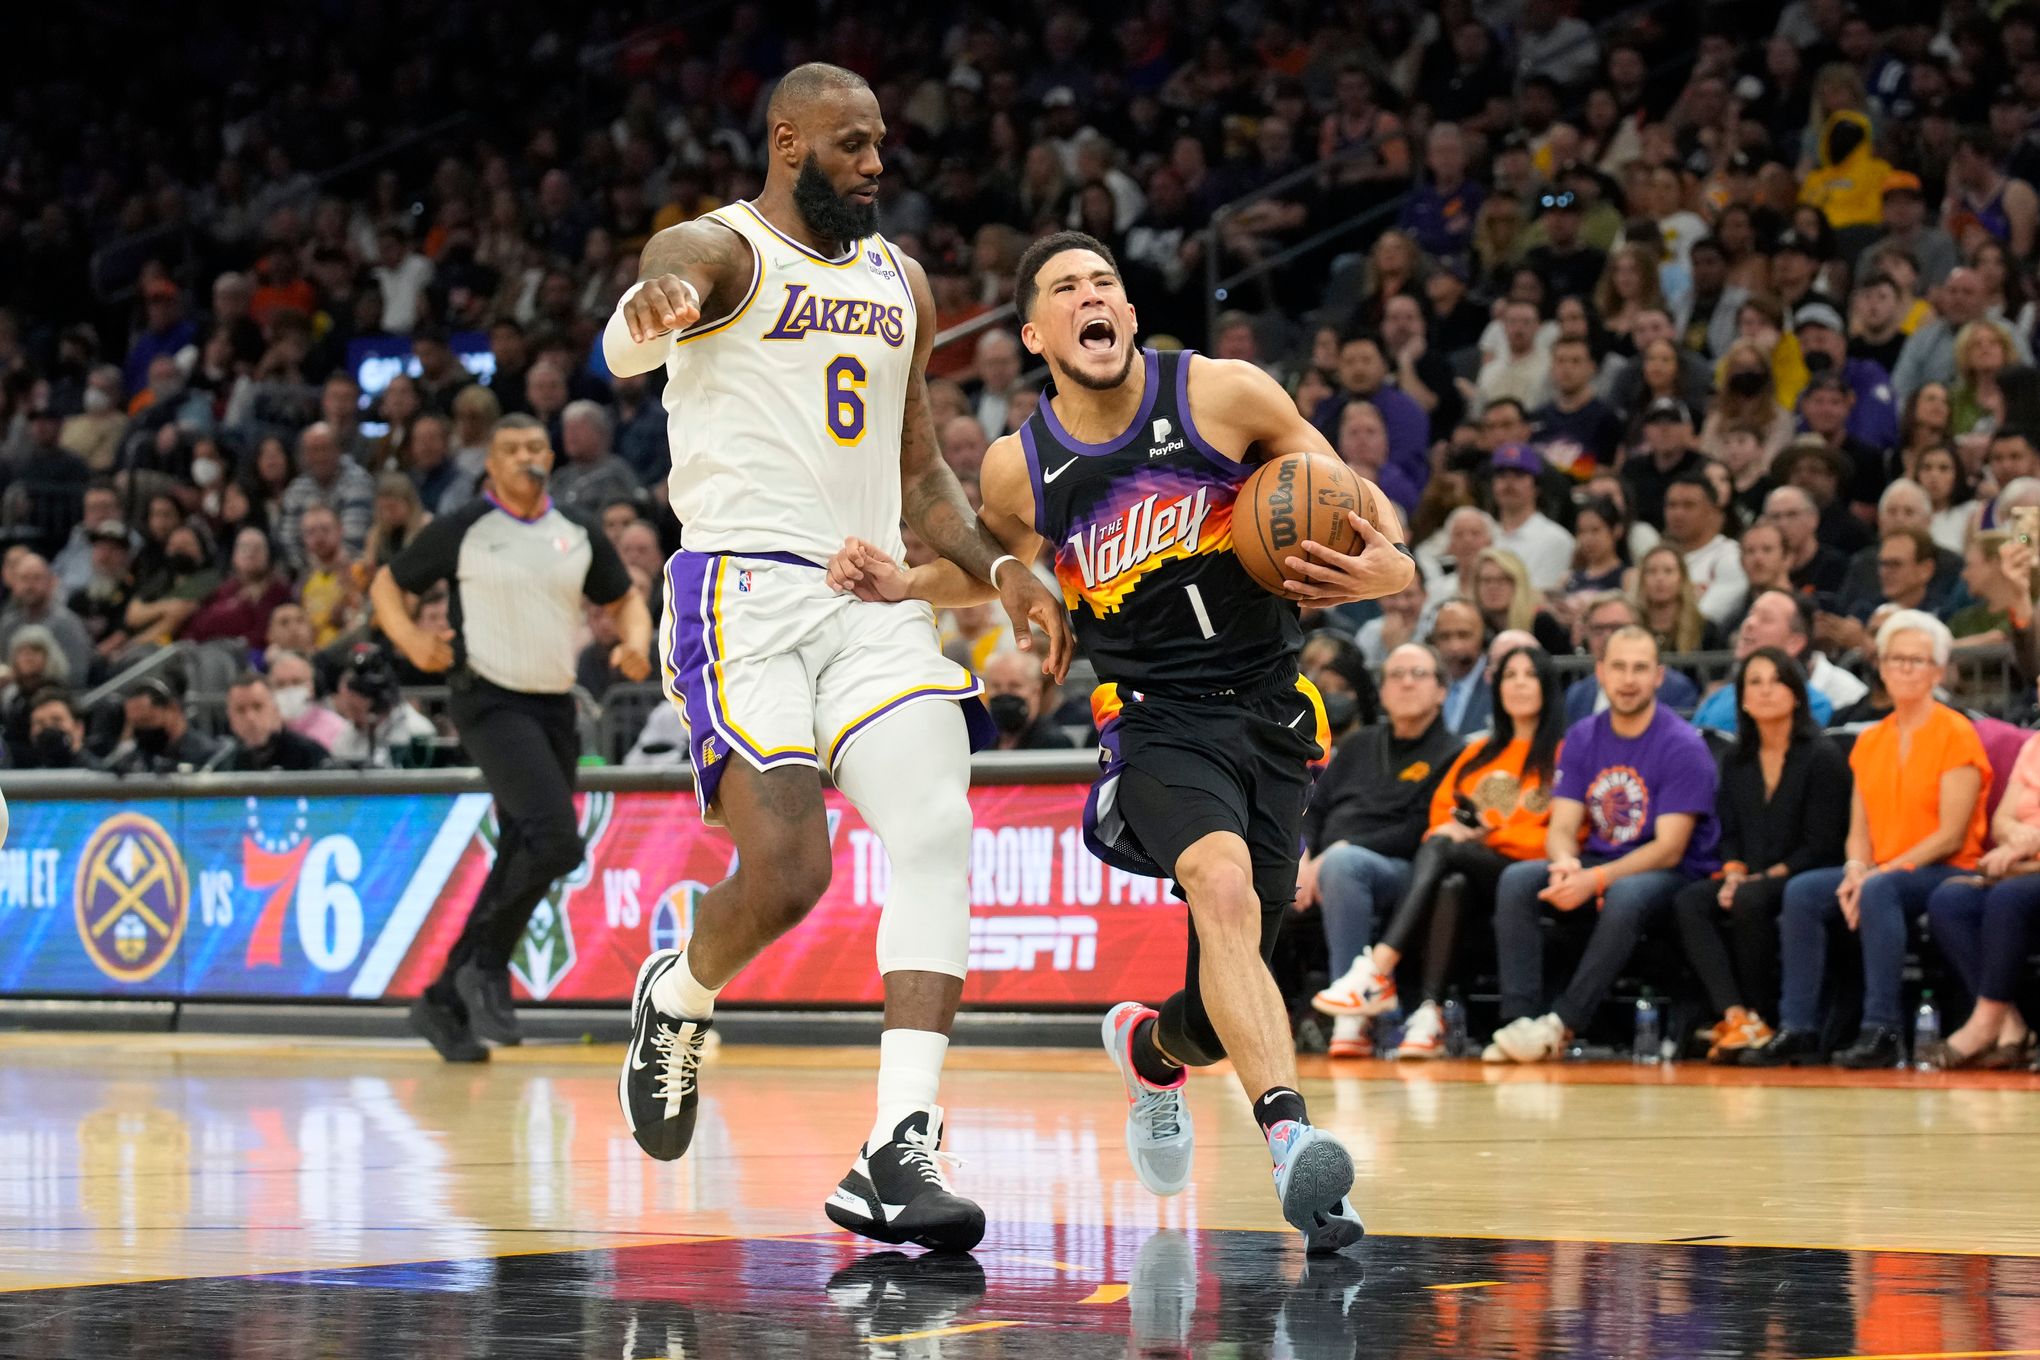 Lakers rout Suns' reserves, extend hopes of escaping play-in